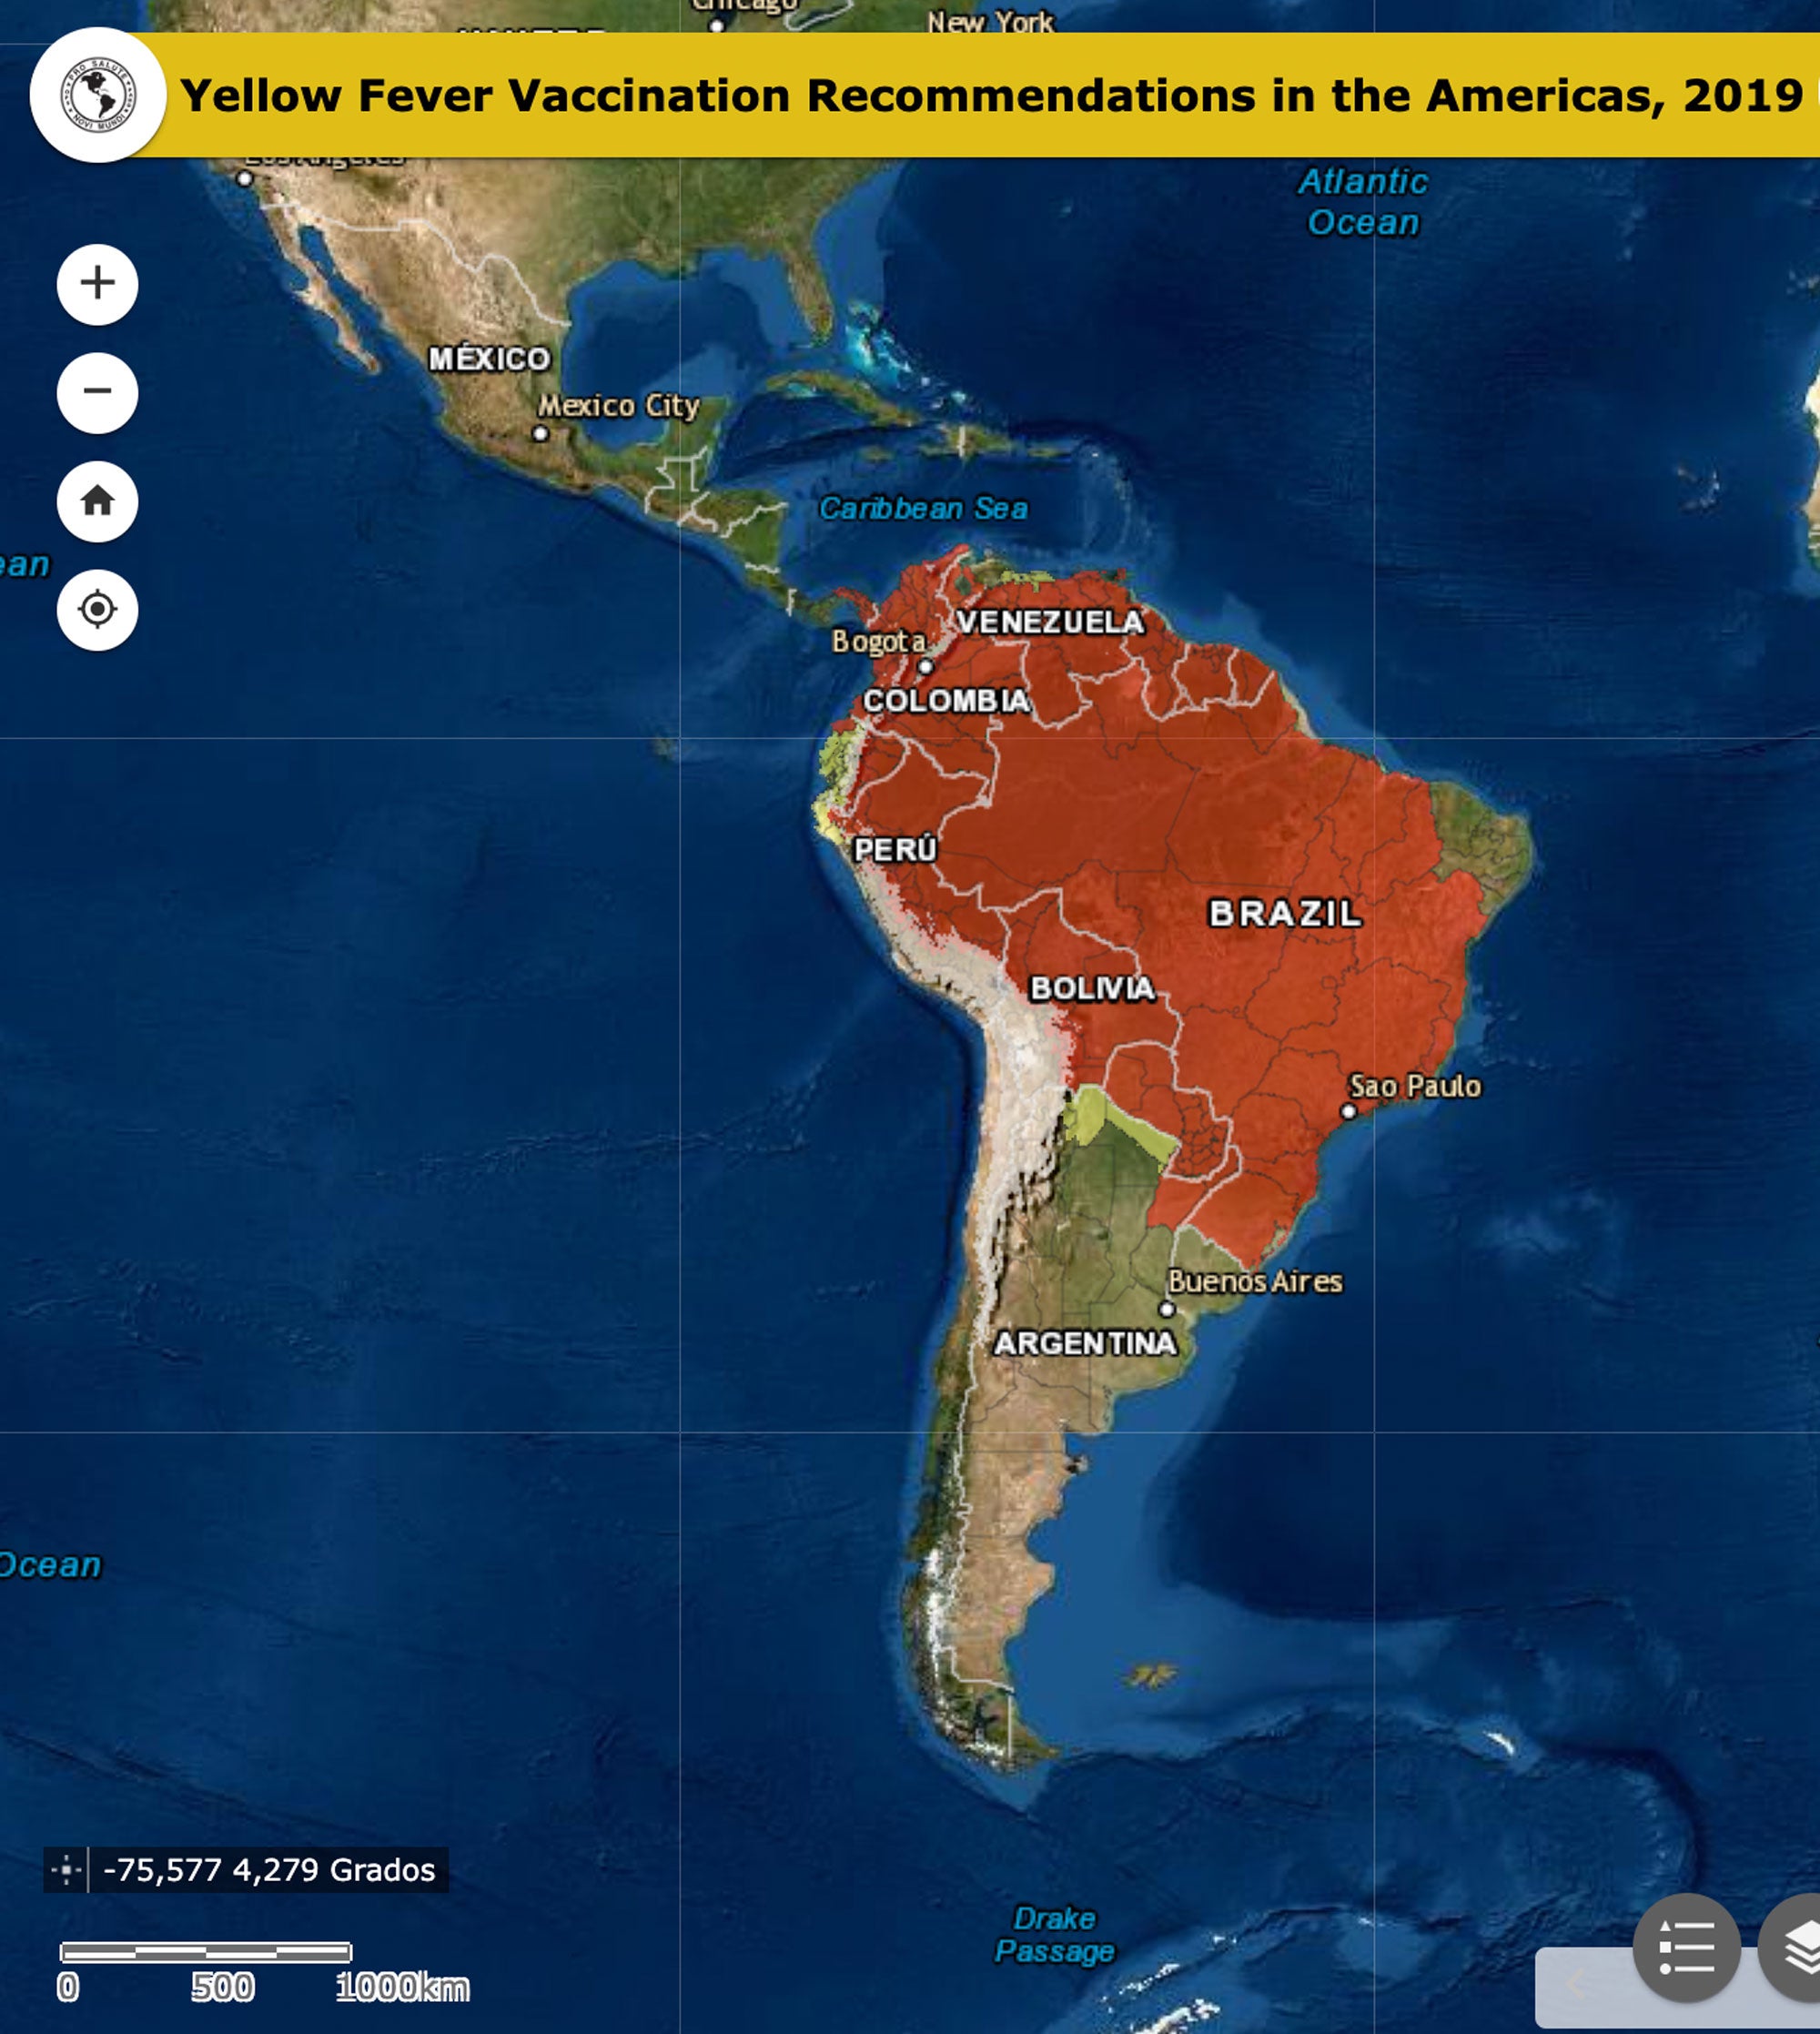 who-yellow-fever-vaccination-recommendations-americas-2019